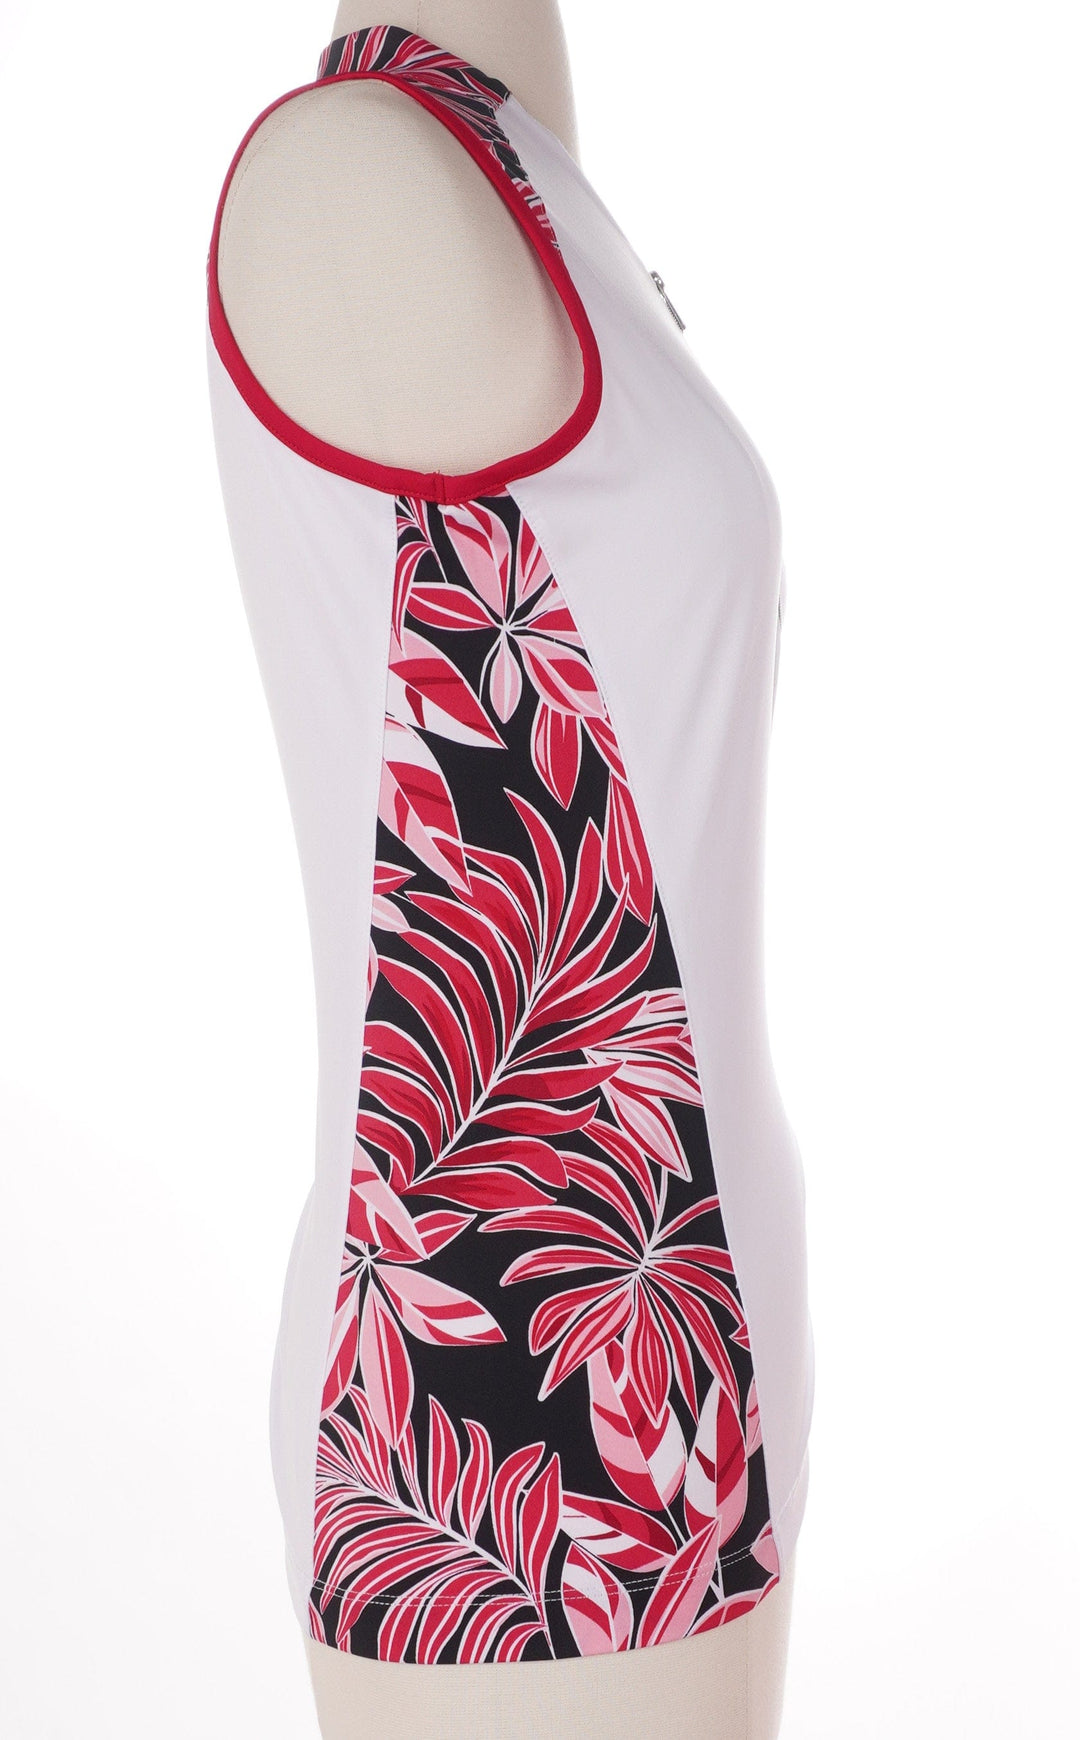 Tail White/Pink / Small Tail Sleeveless Top - Summer Leaves Onyx - Size Small